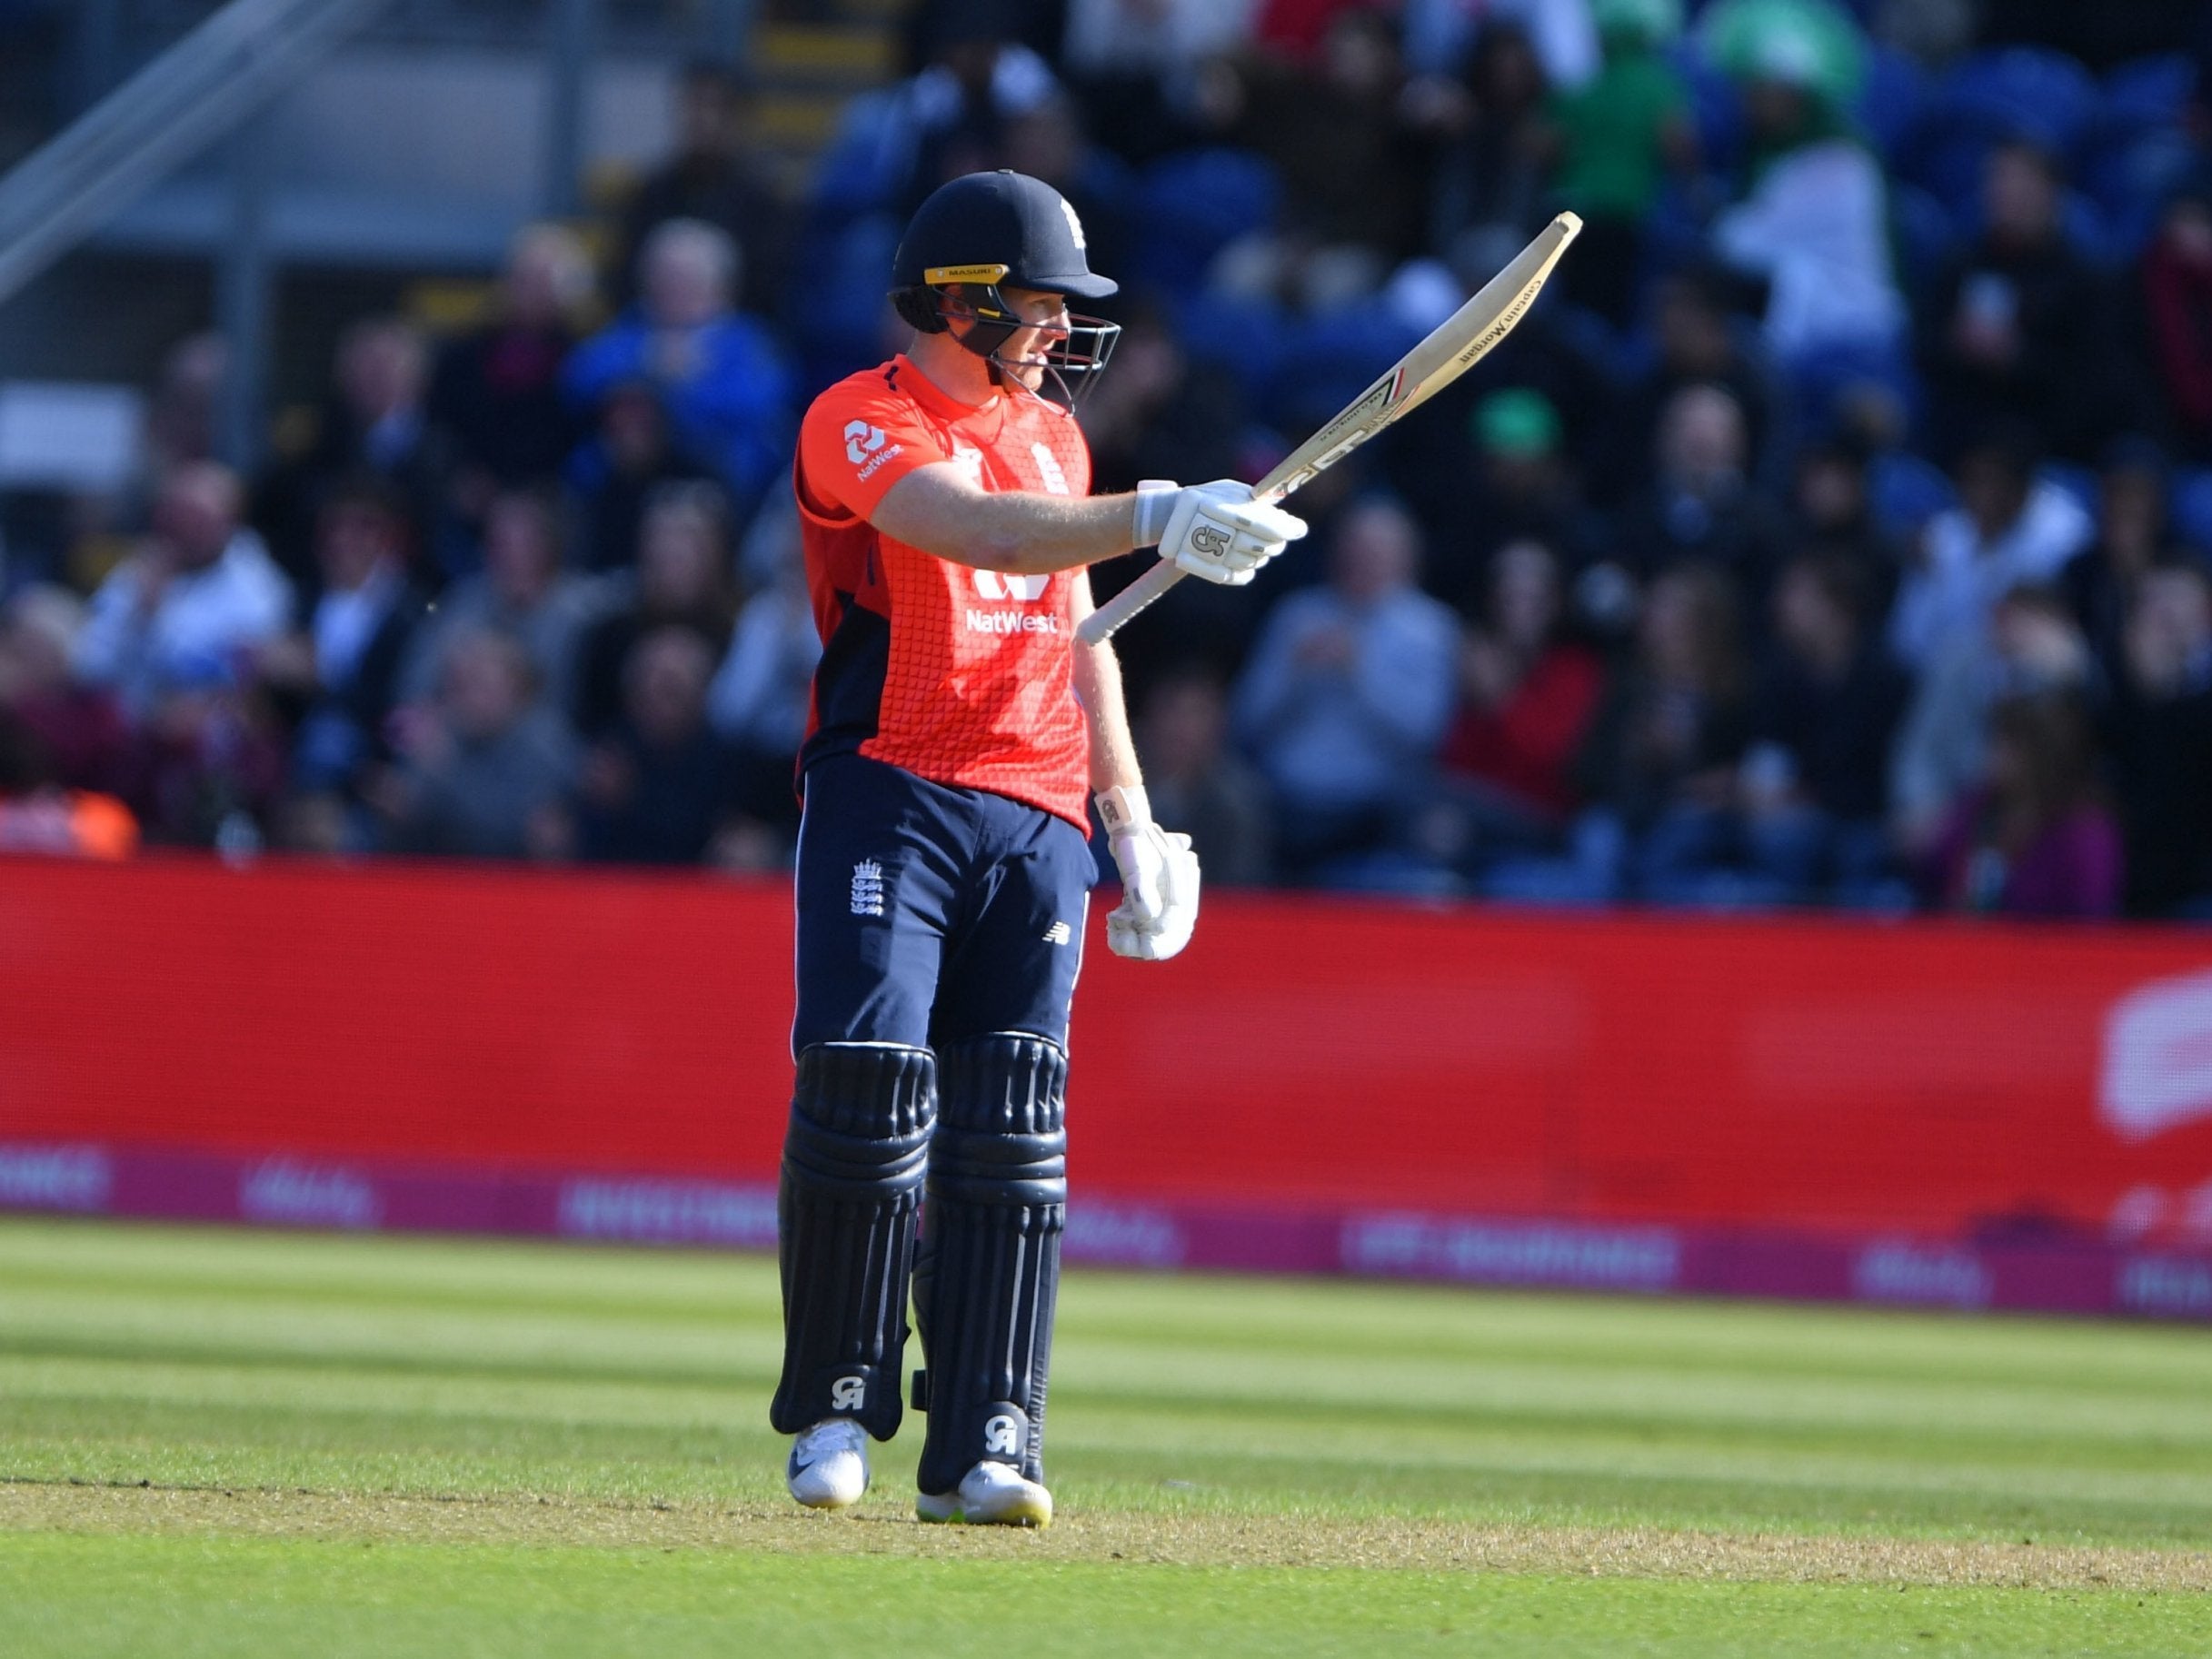 Morgan saw England home with an unbeaten 57 from 29 balls